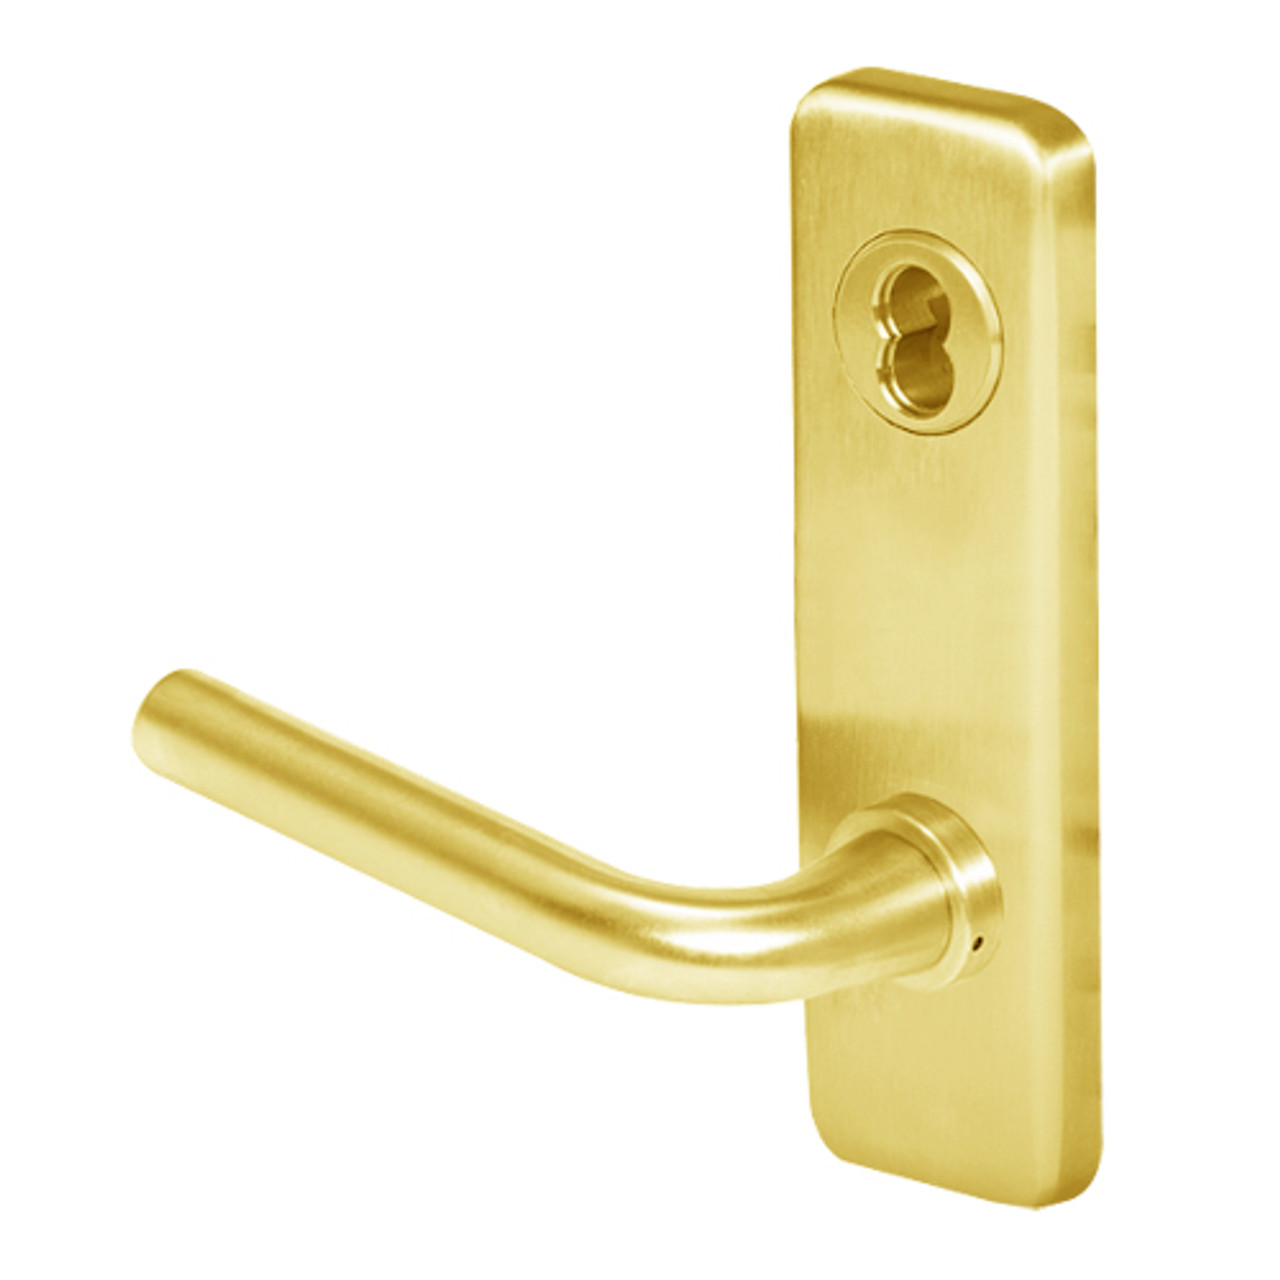 45H0LB12J605 Best 40H Series Privacy with Deadbolt Heavy Duty Mortise Lever Lock with Solid Tube with No Return in Bright Brass